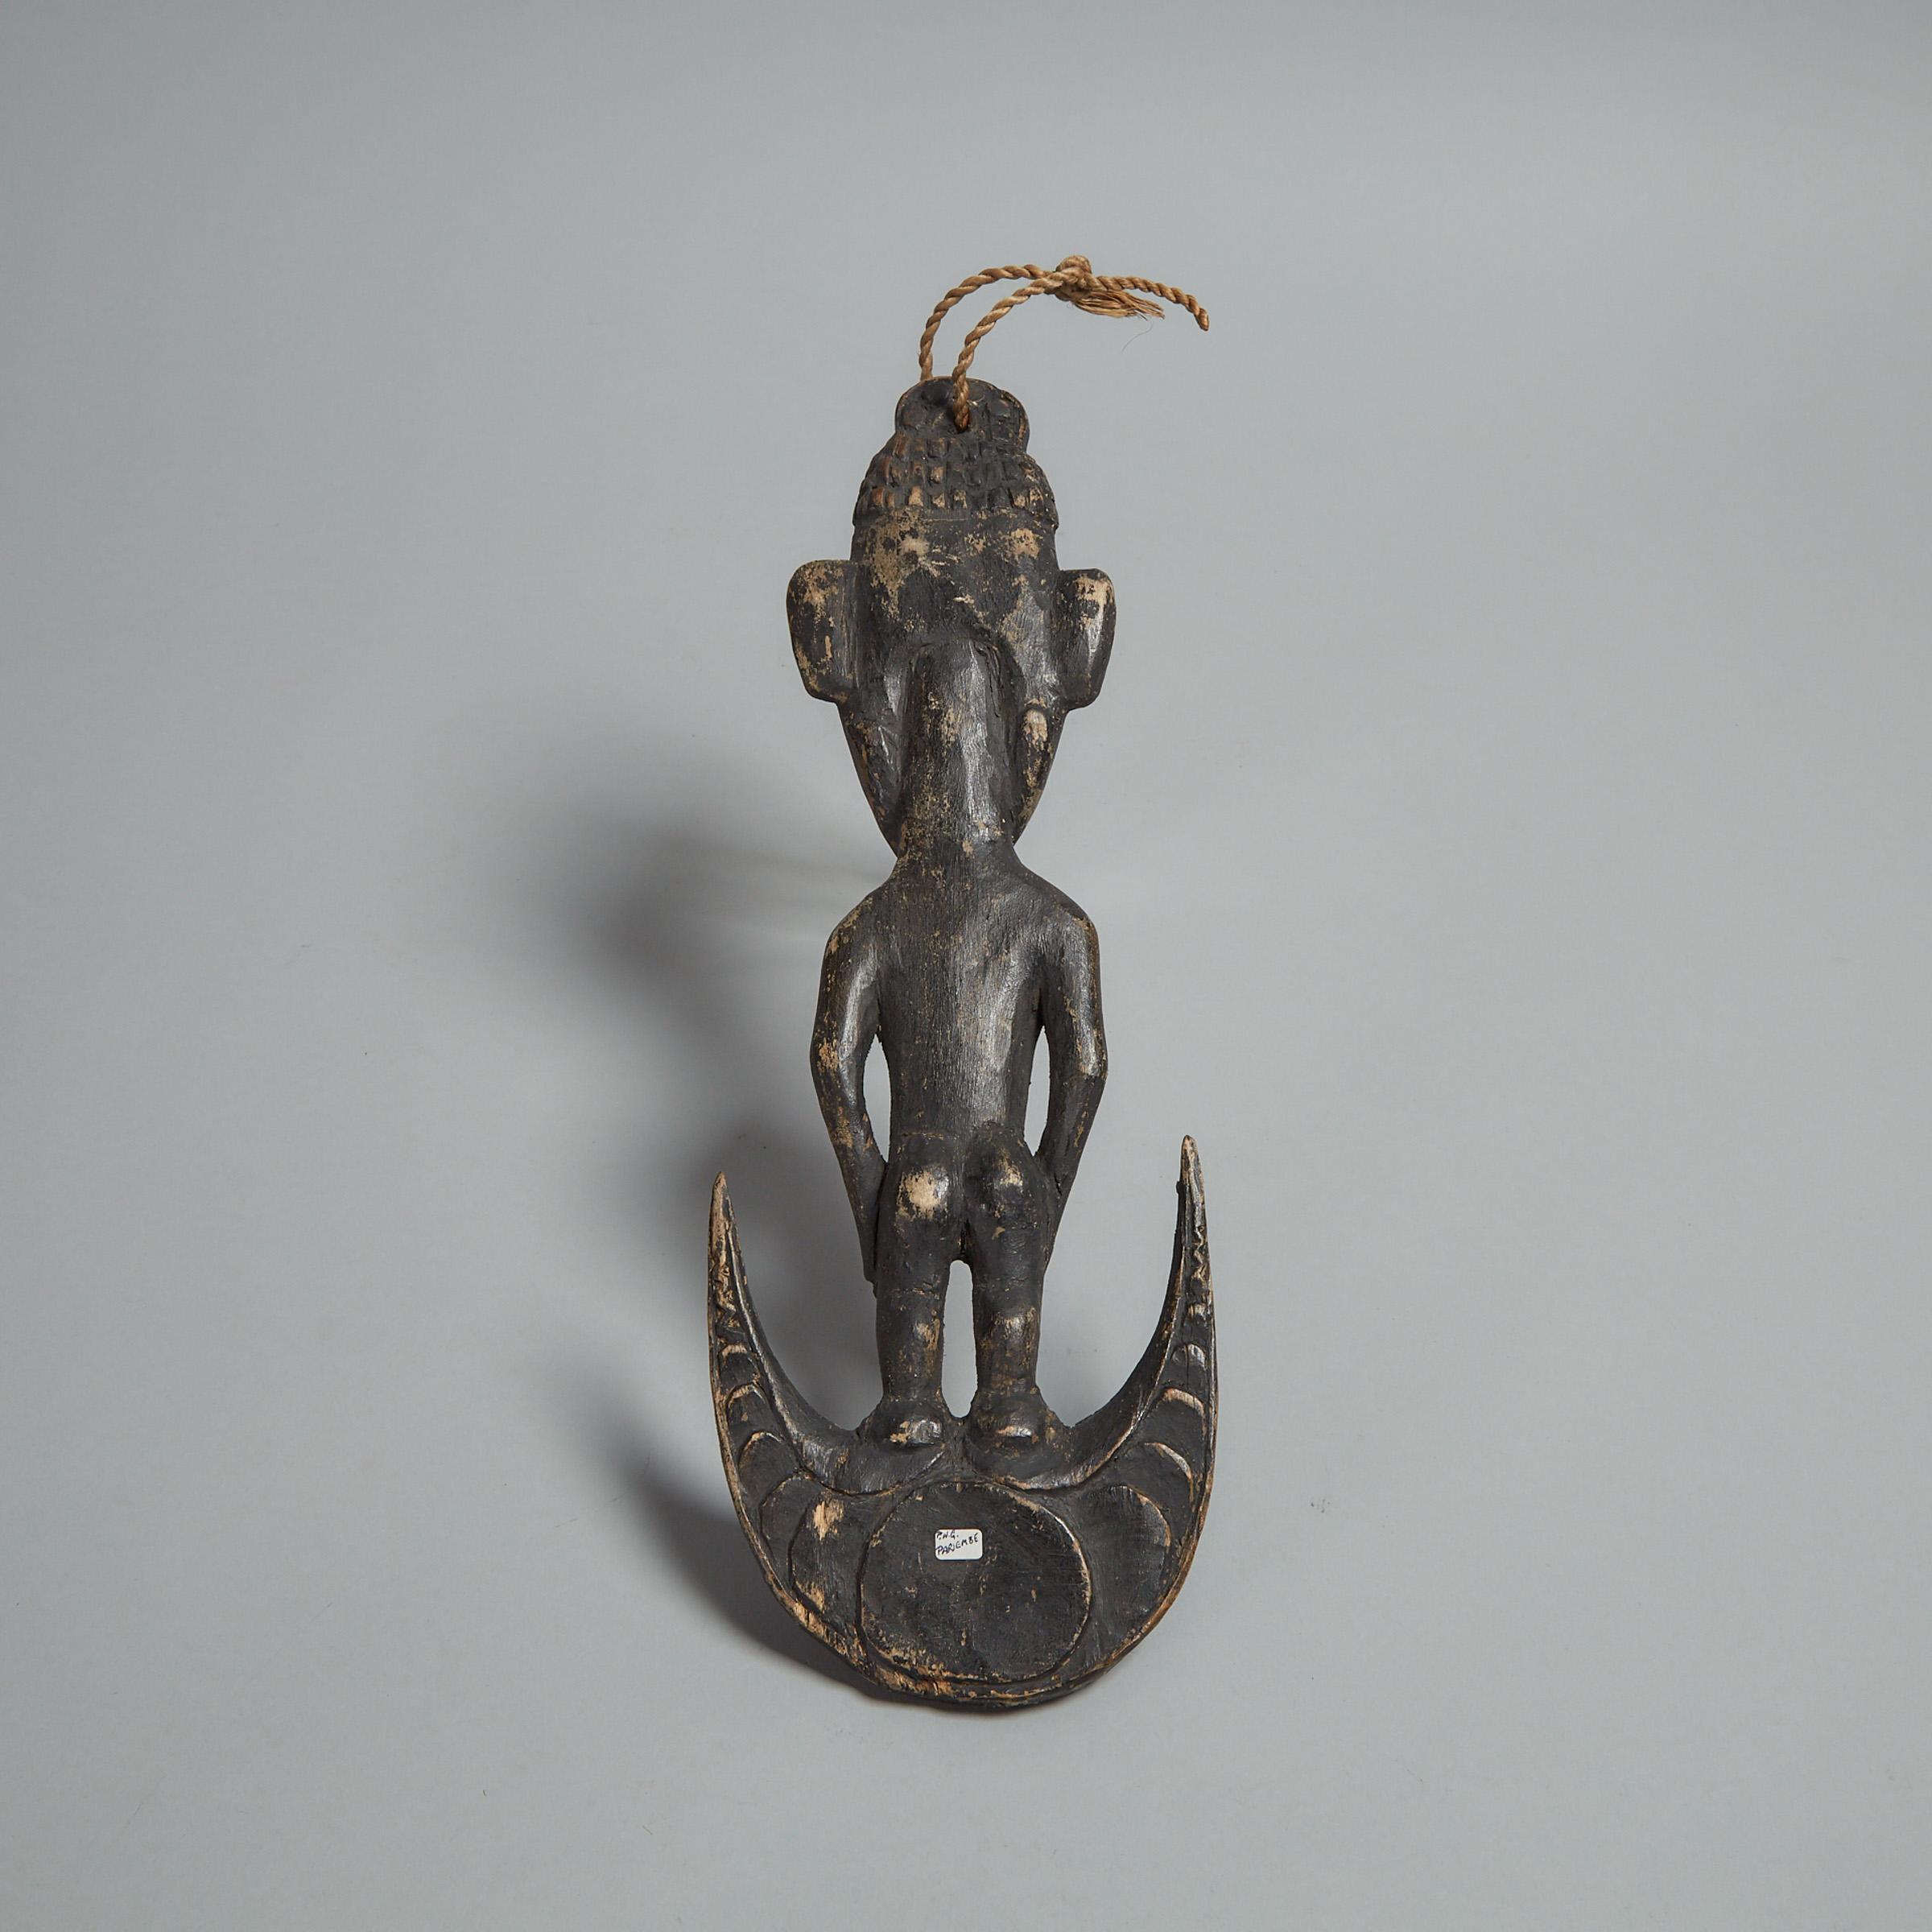 Sepik River Figural Suspension/Food Hook, Papua New Guinea, mid to late 20th century